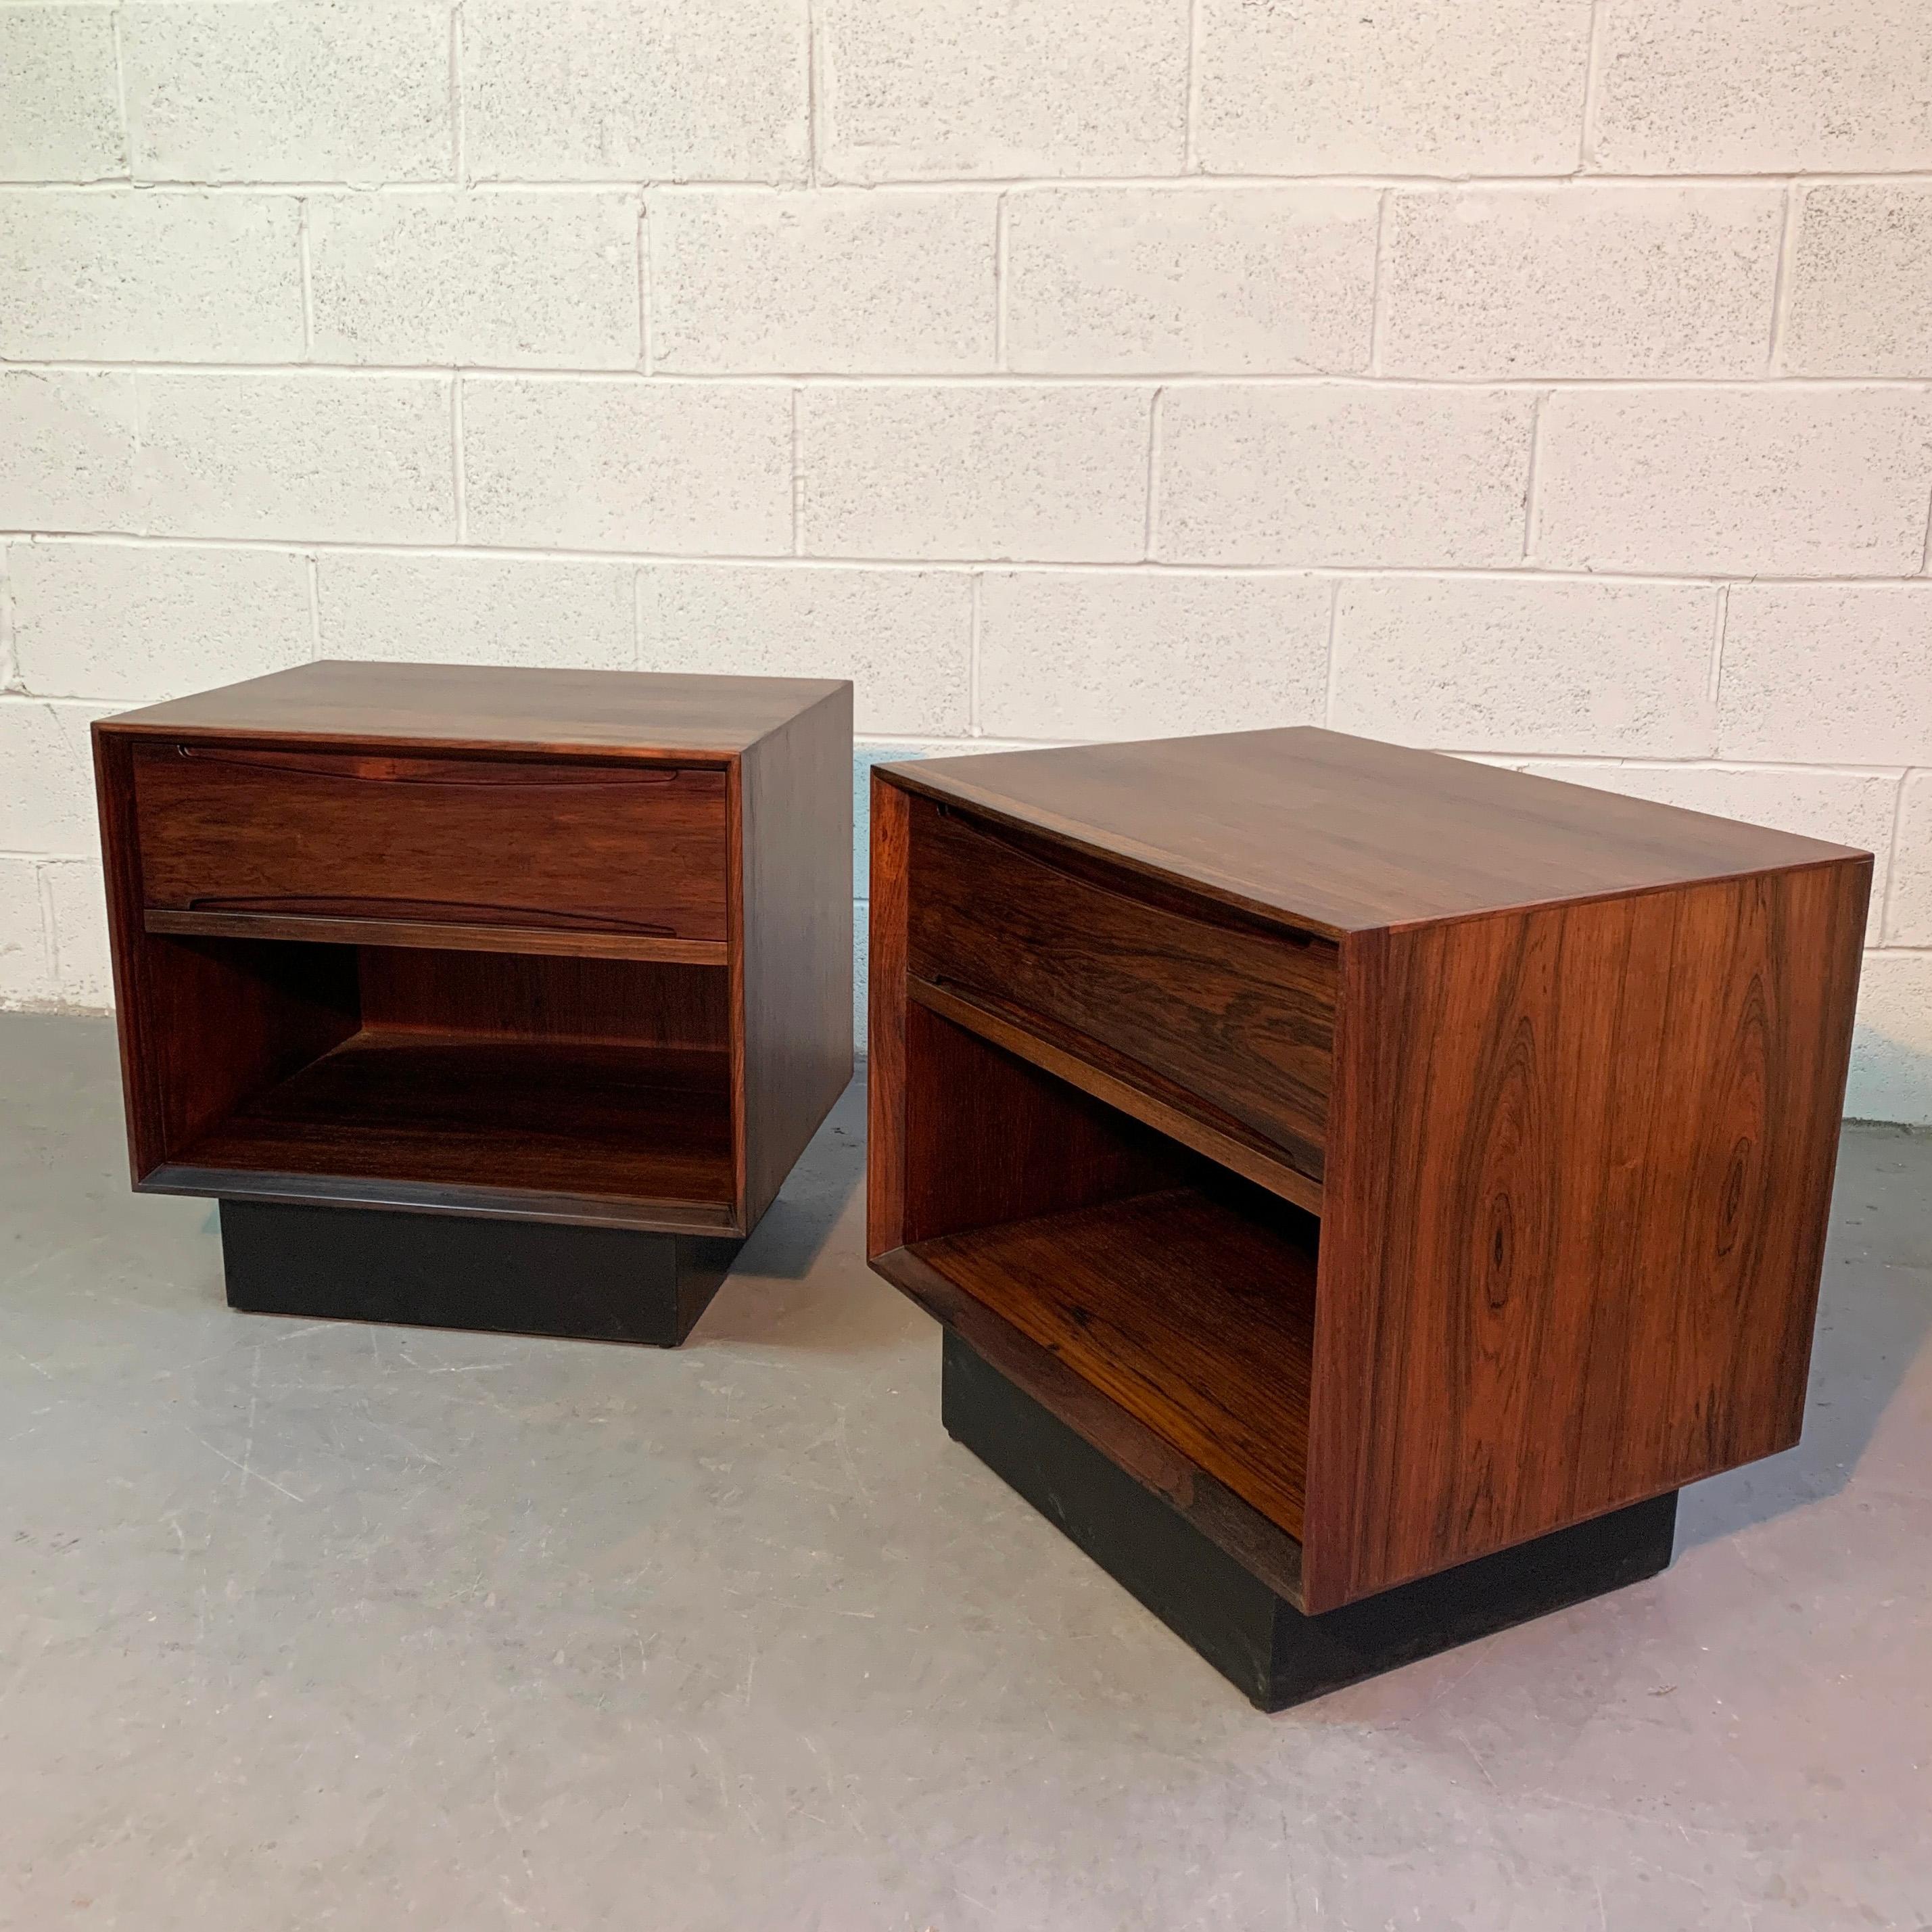 Pair of streamlined, Mid-Century Modern, rosewood cube nightstands or end tables on black lacquered bases feature a top drawer with recessed pulls and open storage below at 8.25 inches ht. They are finished on all sides.